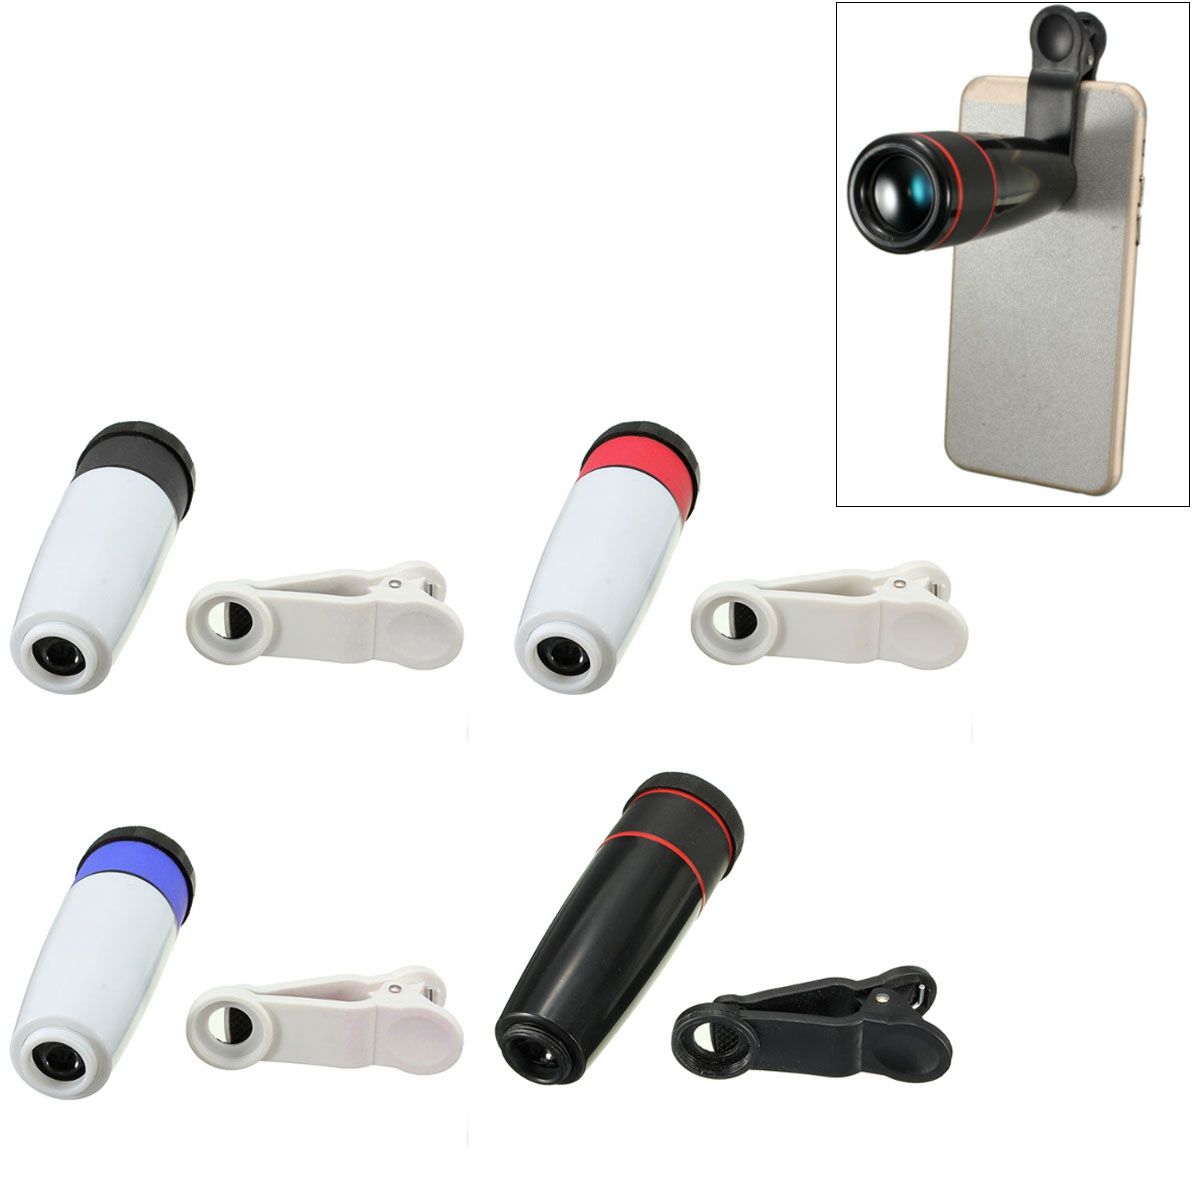 12X-Zoom-Clip-on-Phone-Telescope-Telephoto-Camera-Lens-for-iPhone-Samsung-HTC-Smartphone-1029019